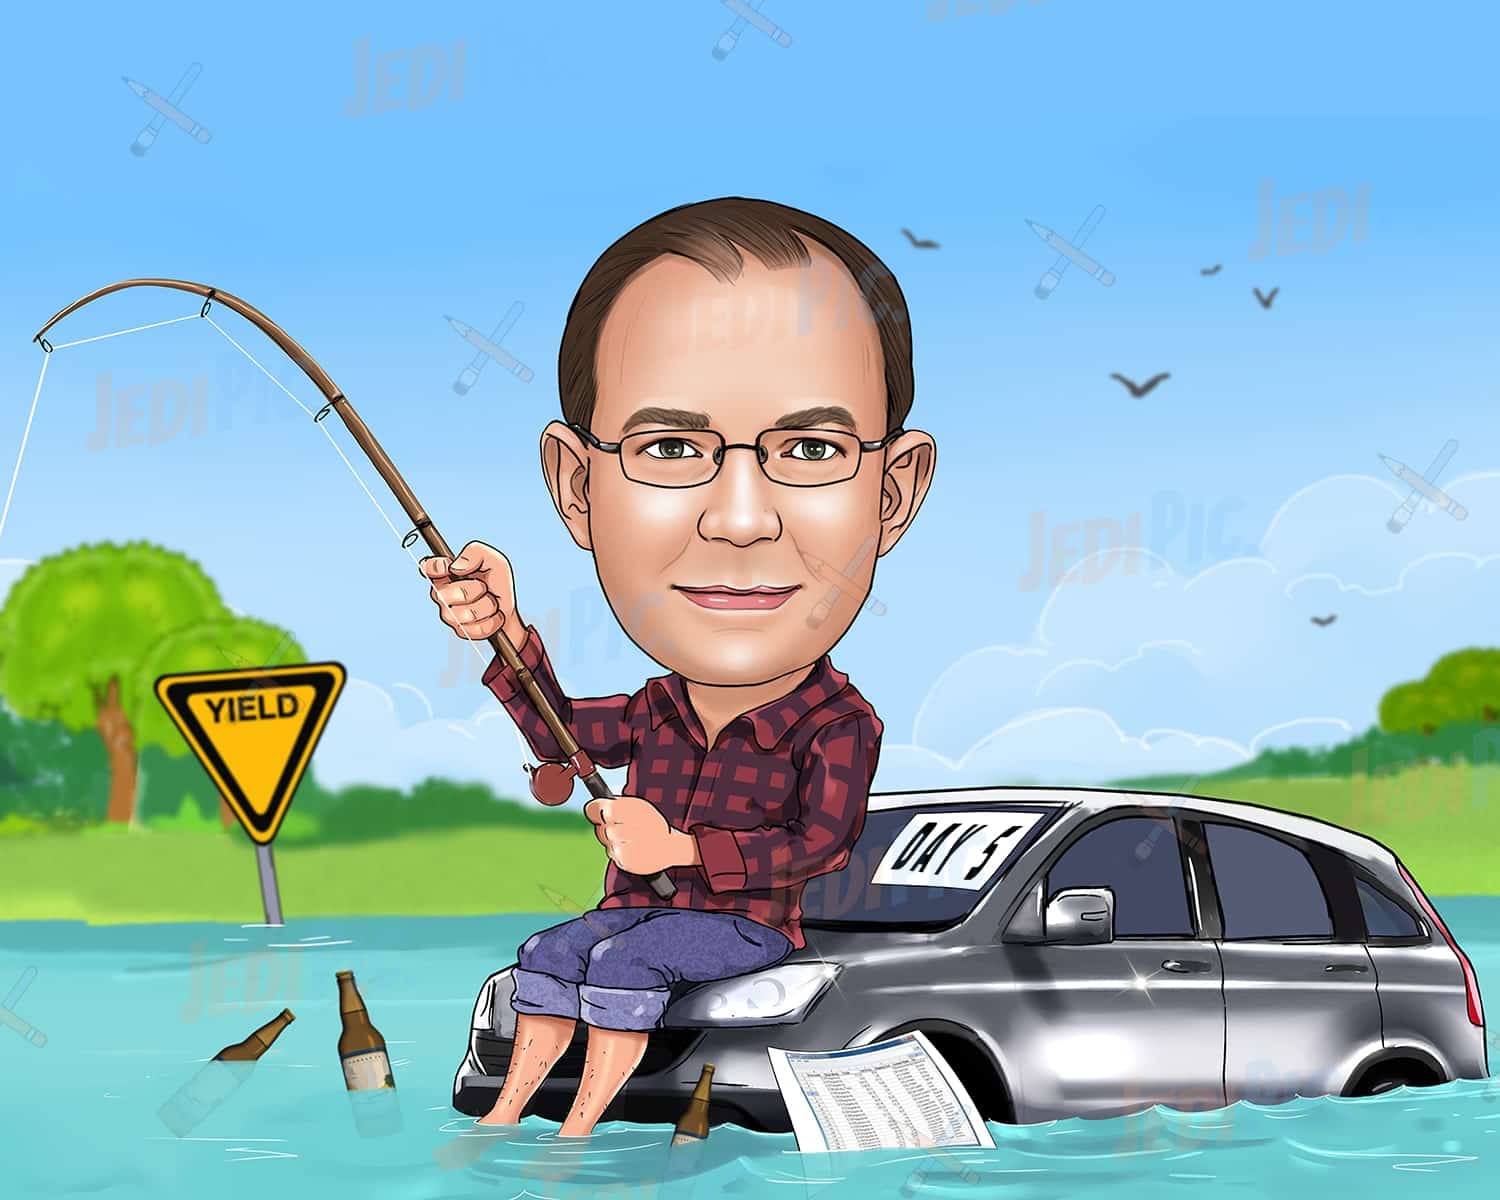 Man Fishing Caricature with Custom Background in Digital Style